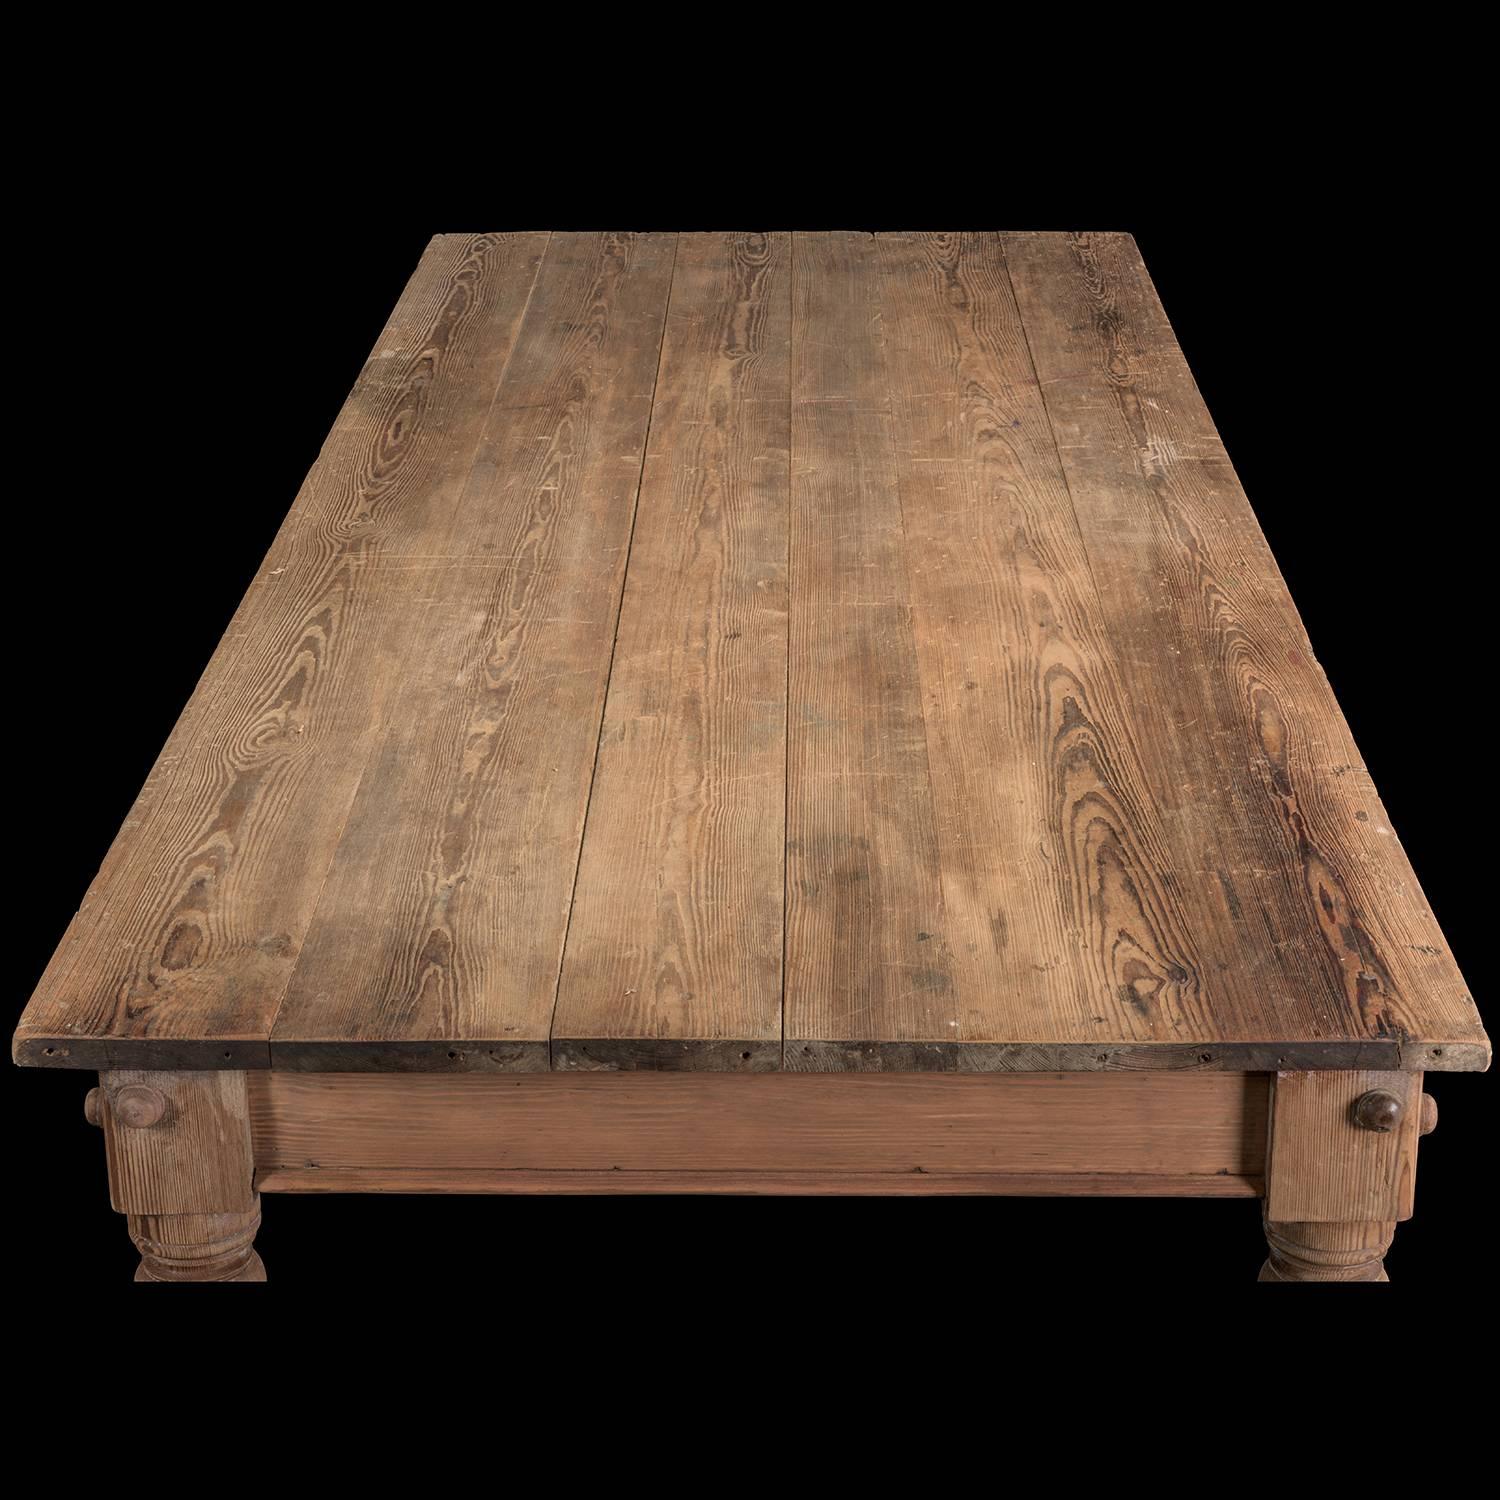 Hand-Crafted Massive Scrubbed Pine Dining Table